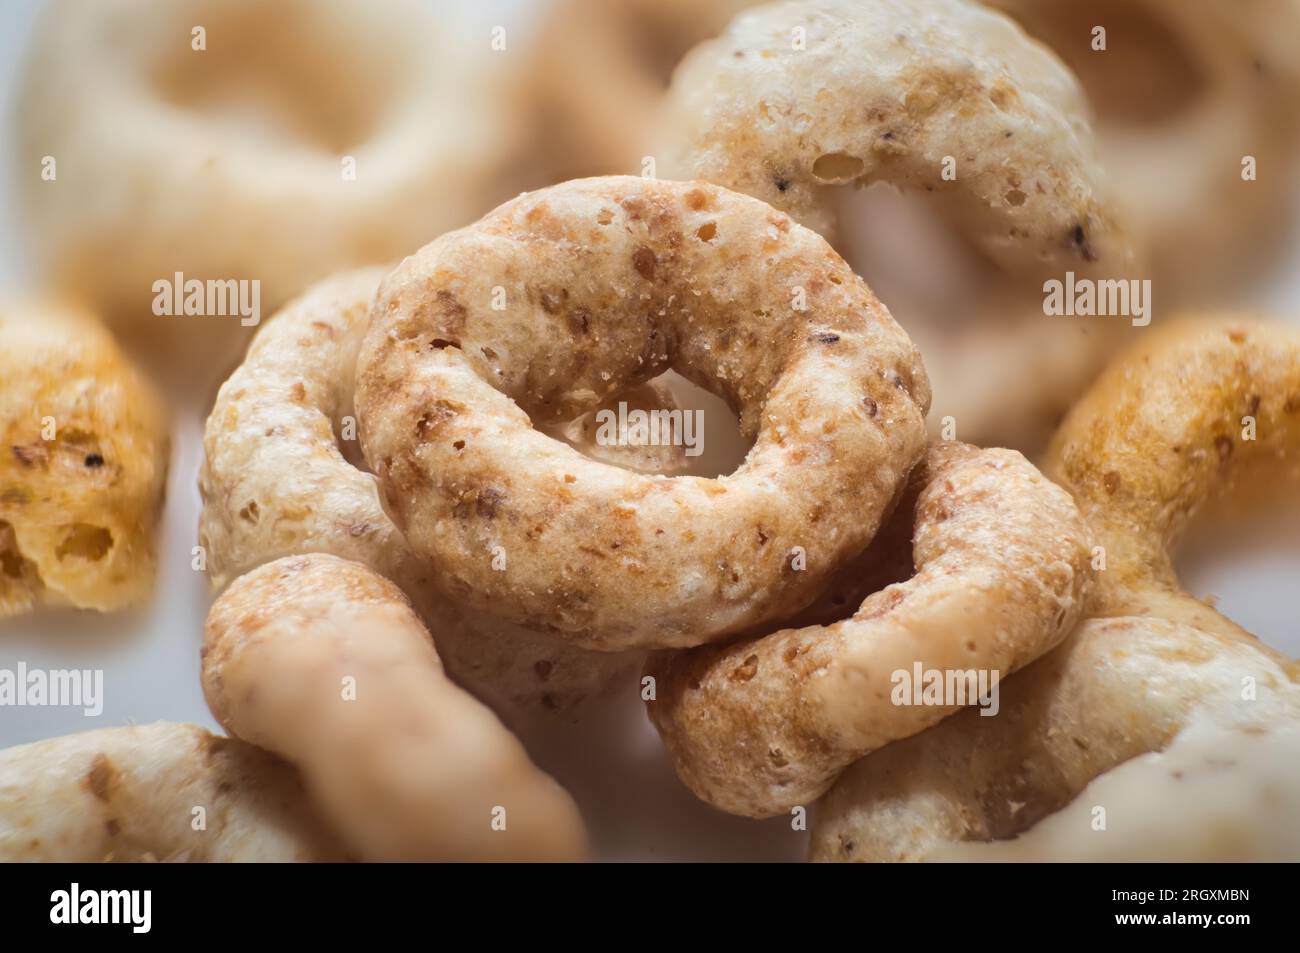 close up of wholegrain cheerios showing detail of the foodstuff Stock Photo